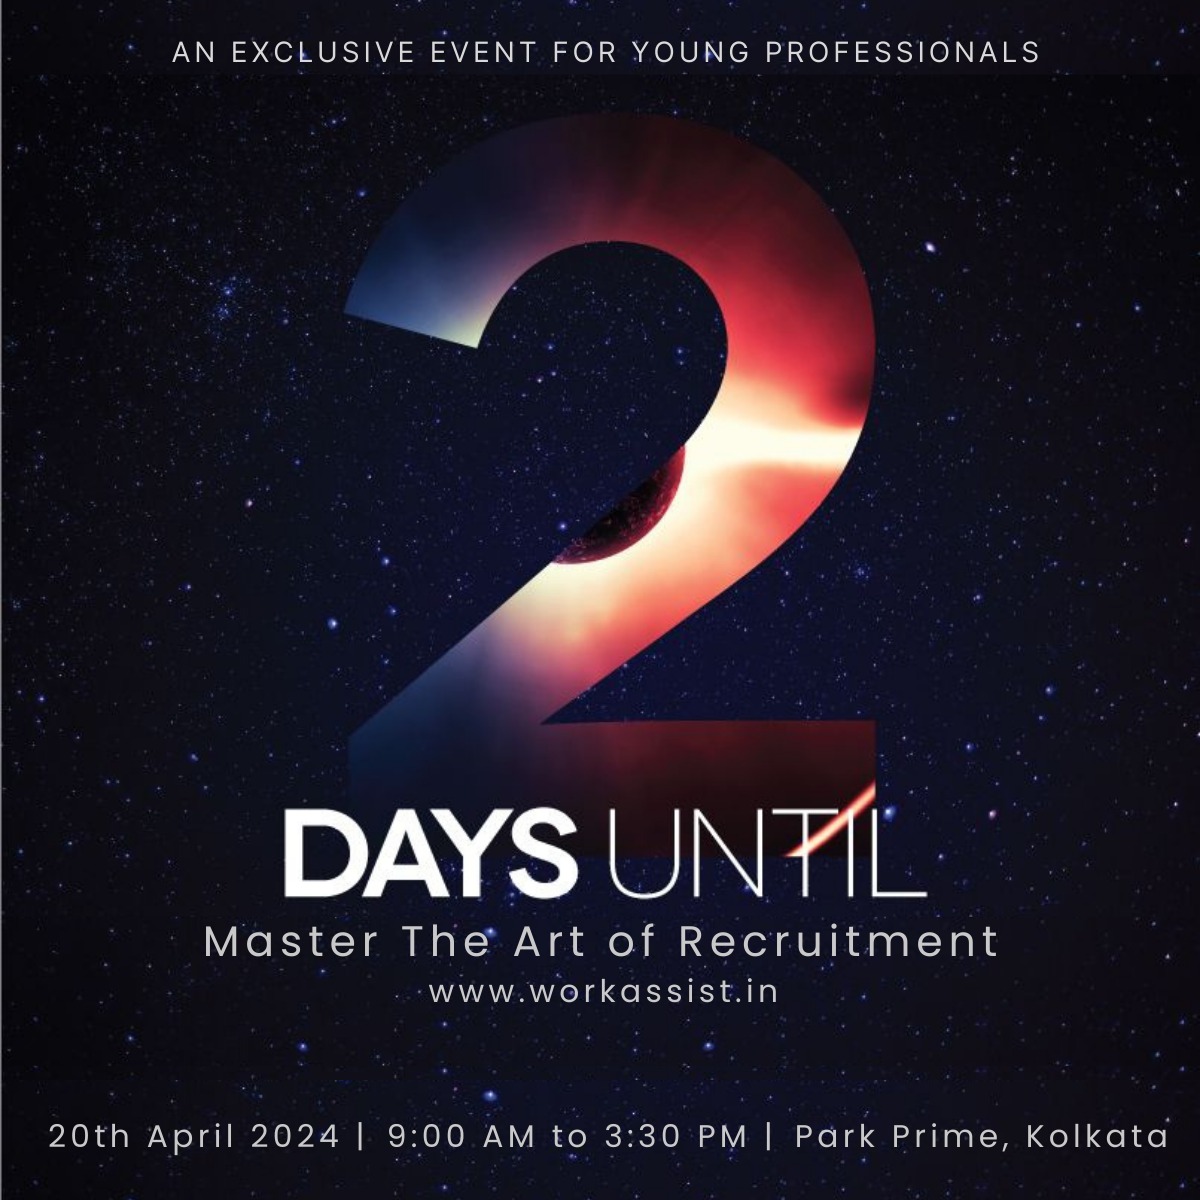 Only 2 days left! Are you an HR professional looking to take your recruitment skills to the next level? 

Register now: forms.gle/qTitBT8sDsp8wt…

#HRTraining #Recruitment #TalentAcquisition #Kolkata #Workassist #WaytogoConsultants #KolkataEvent #Upskilling #HRProfessionals